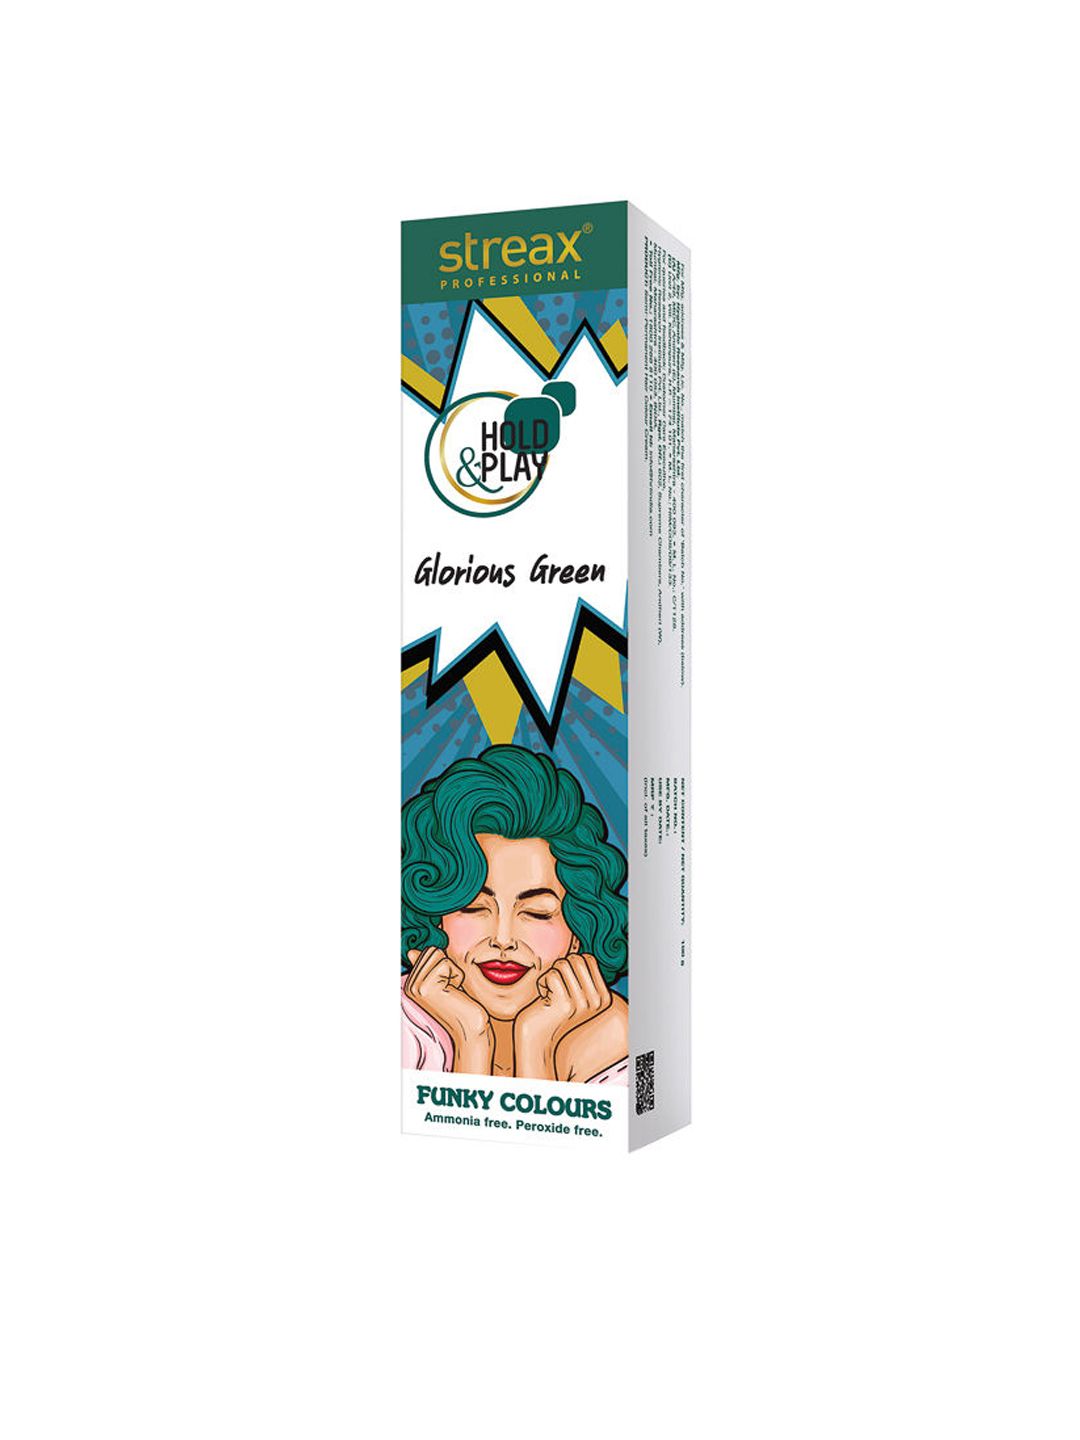 Streax Professional Hold & Play Funky Colours Glorious Green- 100 g Price in India